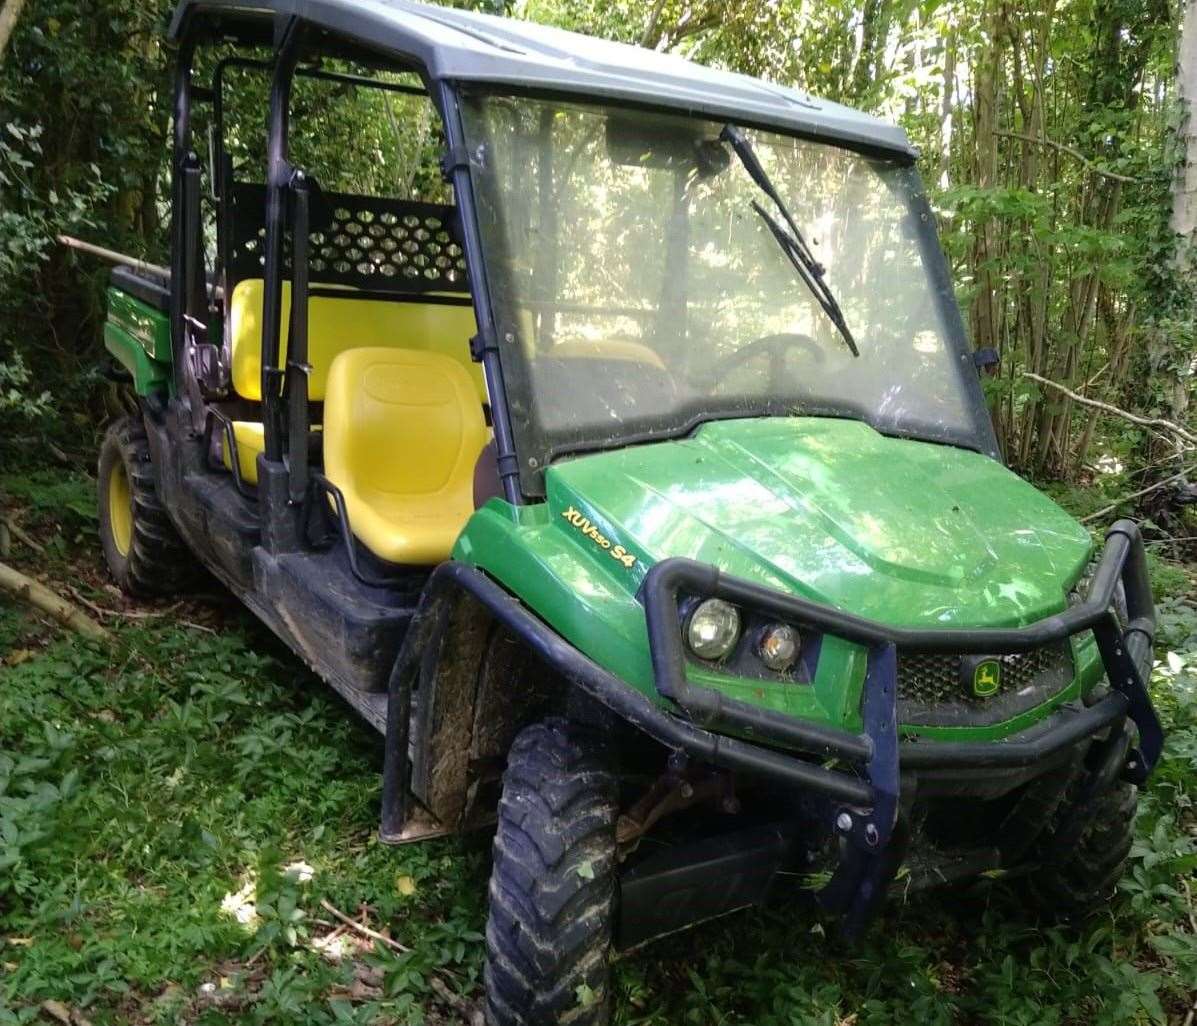 The John Deere Gator was found in a wooded area off the A2 in Dover. Picture: Kent Police